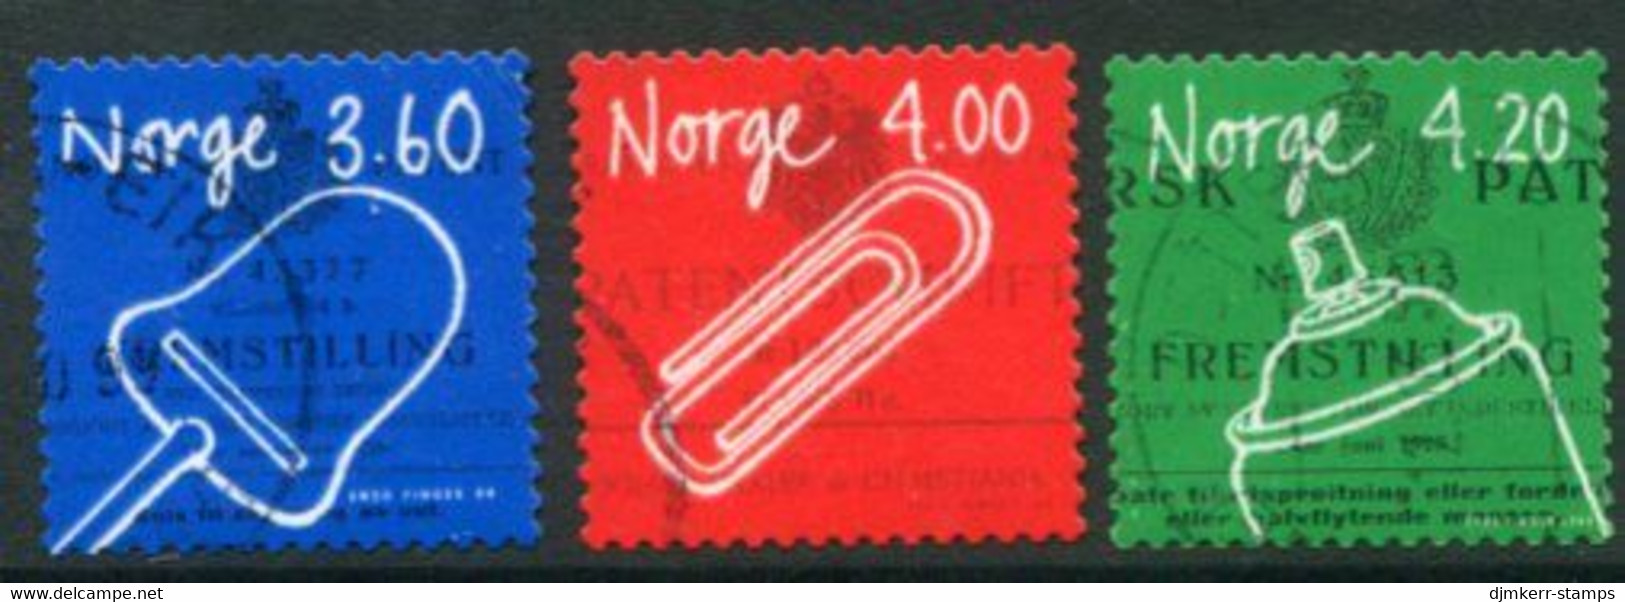 NORWAY 1999-2000 Inventions Used.   Michel 1299-1300 1354 - Usati